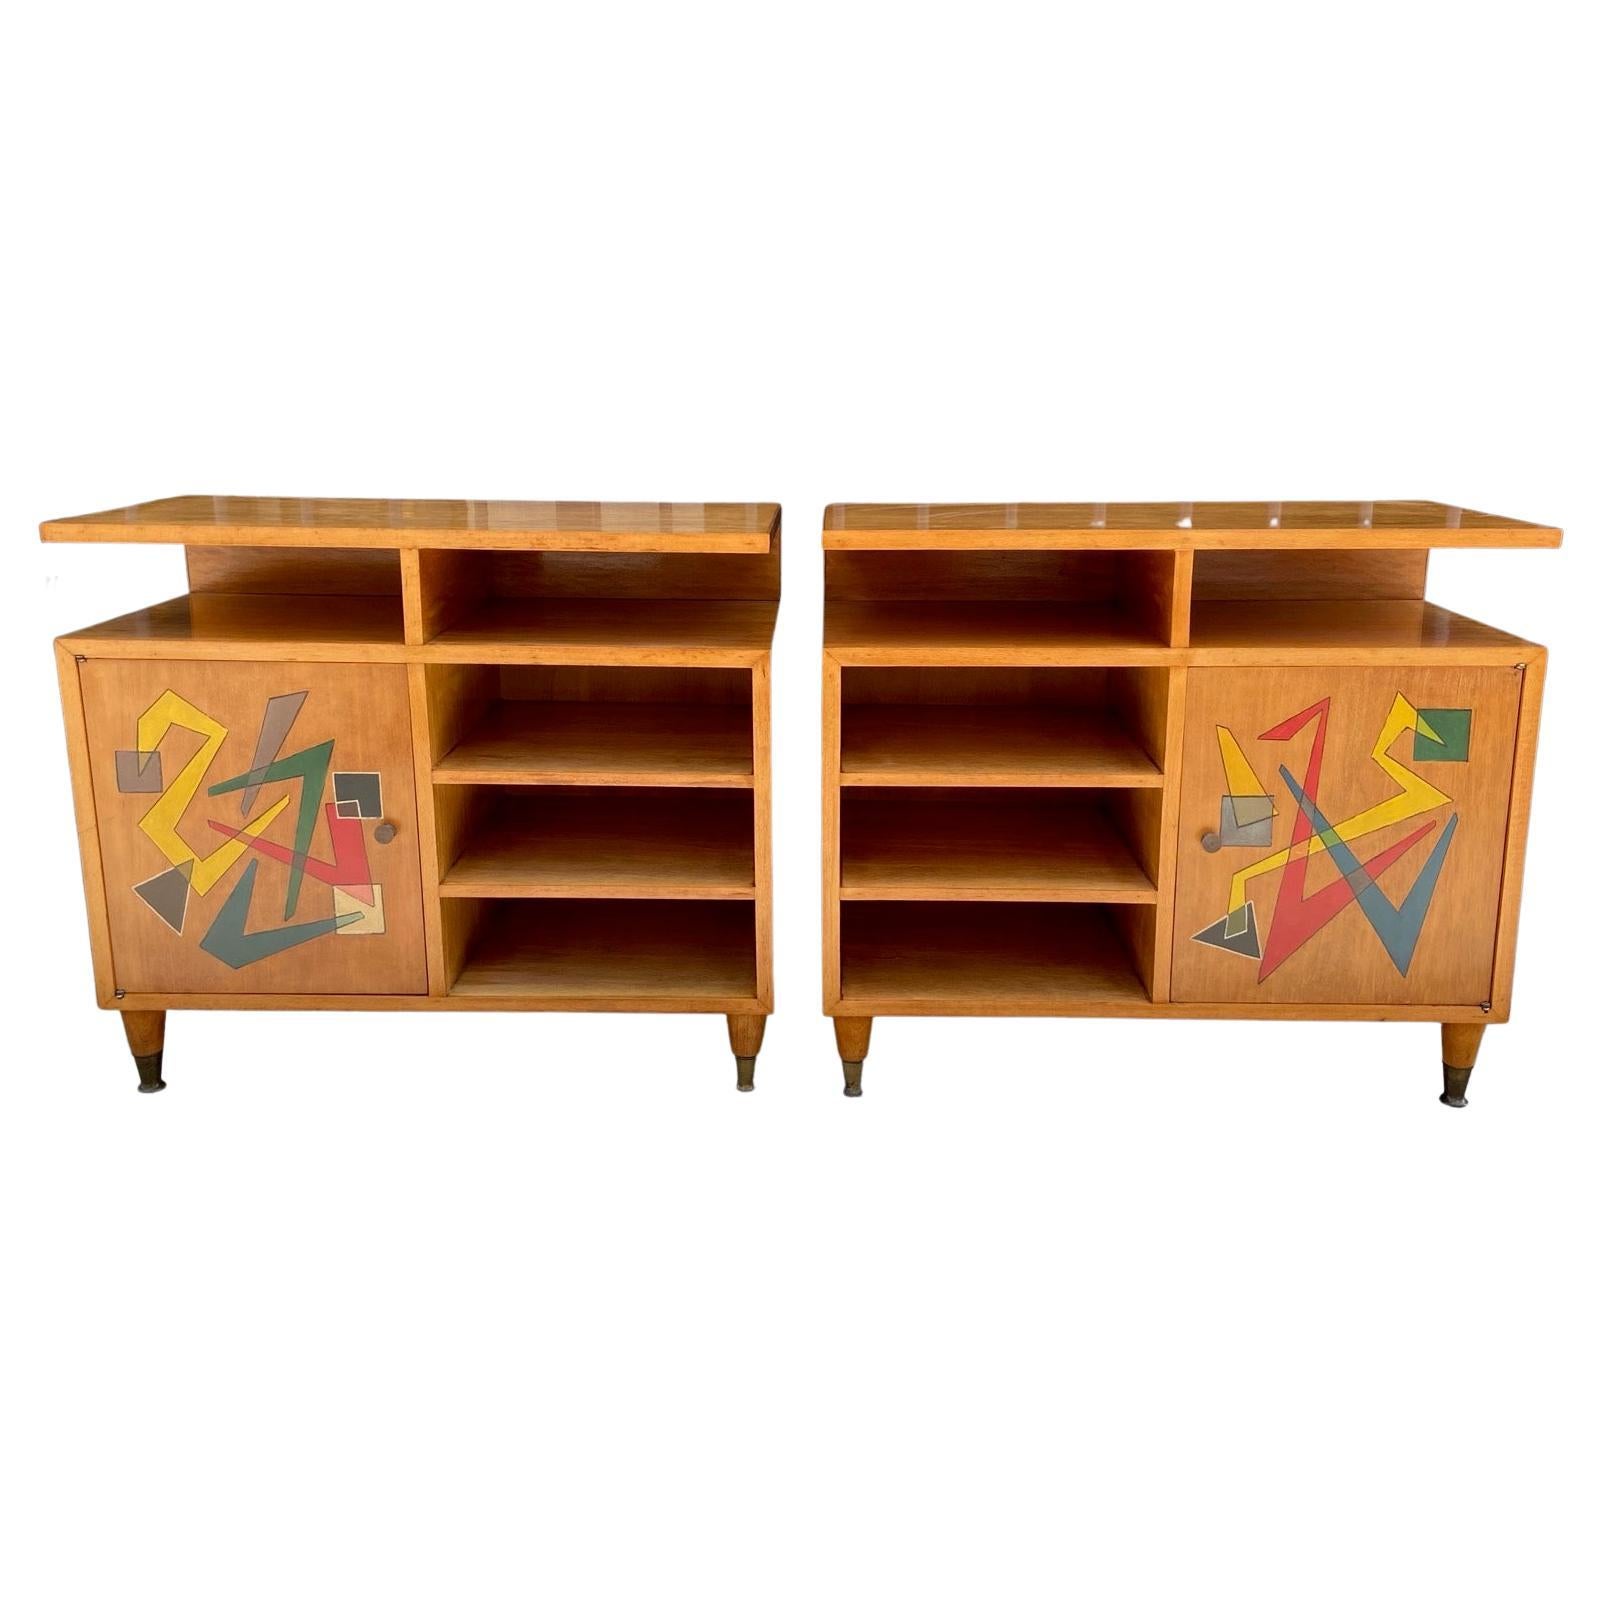 An original, unique and unusual 1950's Italian pair of blond wood cabinets or night stands with colourful abstract painted doors, shelves, brass sabots and handles. Solid, good design and quality. 
 